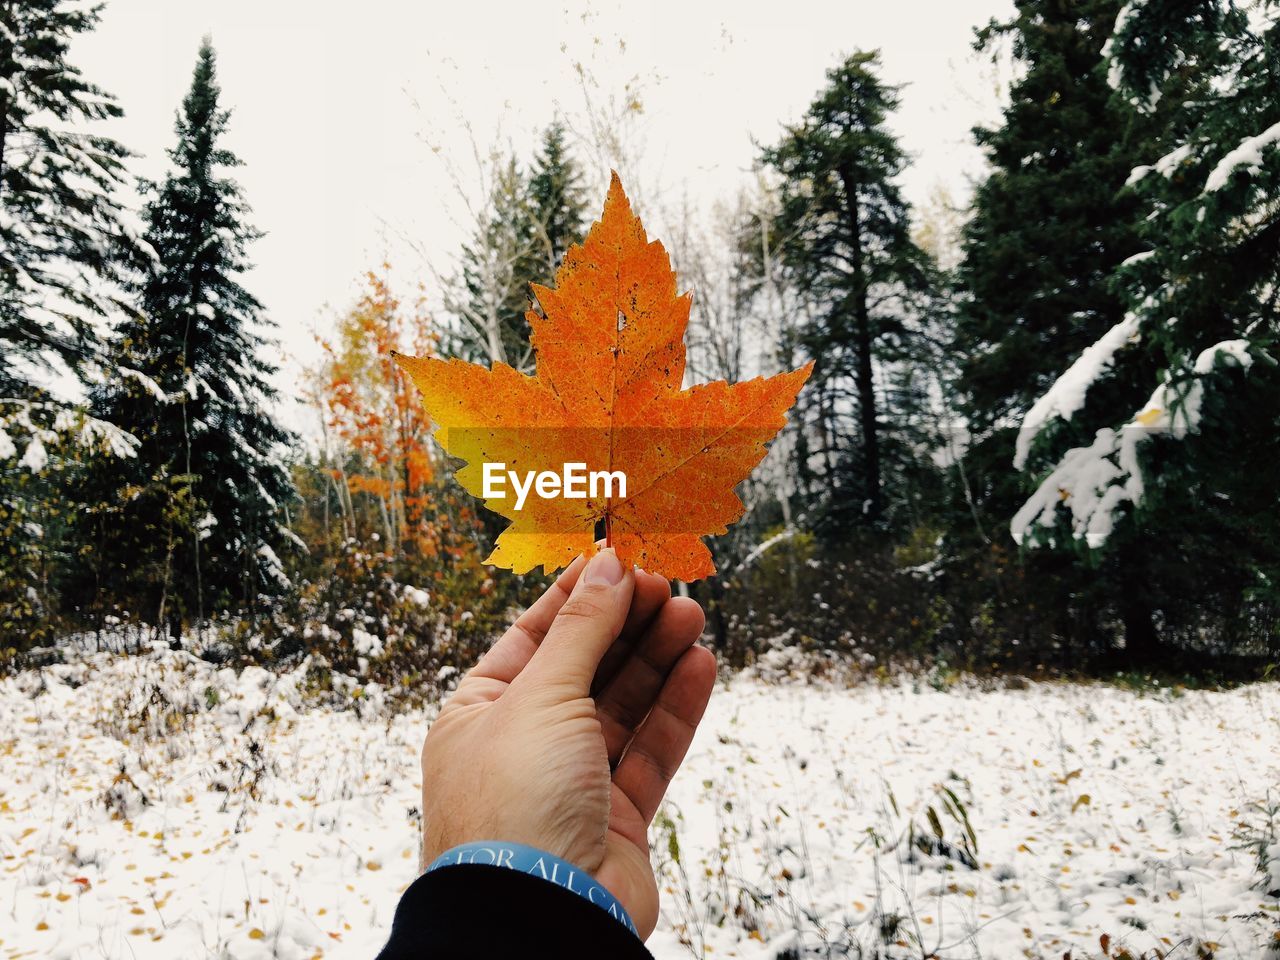 Cropped hand using maple leaf against trees in forest